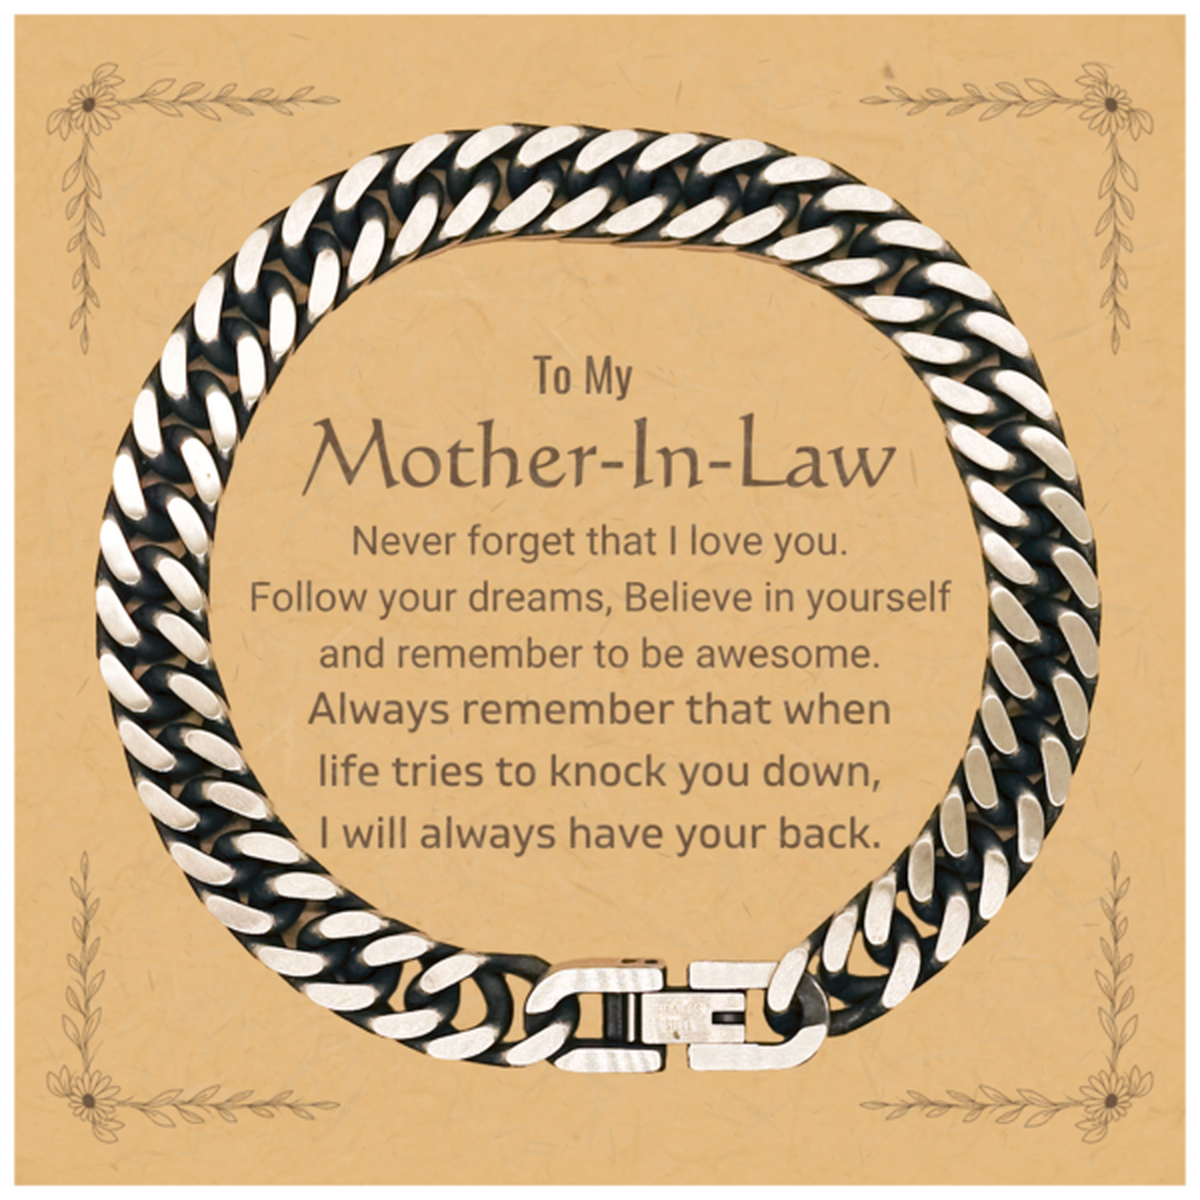 Inspirational Gifts for Mother-In-Law, Follow your dreams, Believe in yourself, Mother-In-Law Cuban Link Chain Bracelet, Birthday Christmas Unique Gifts For Mother-In-Law